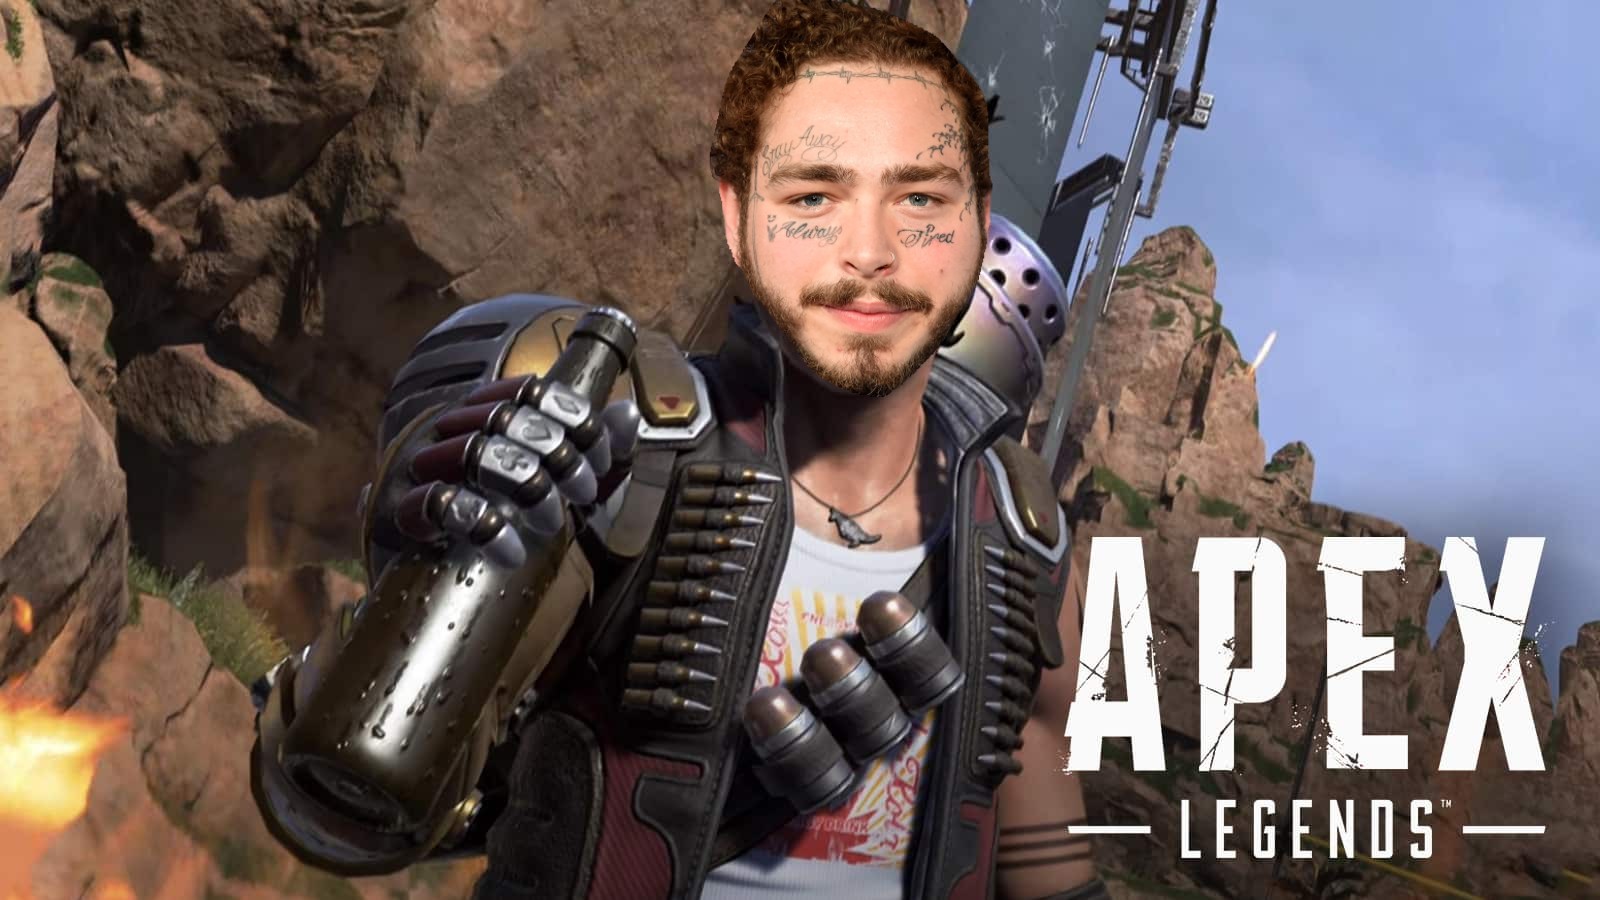 post malone will attend the apex legends broadcast event!